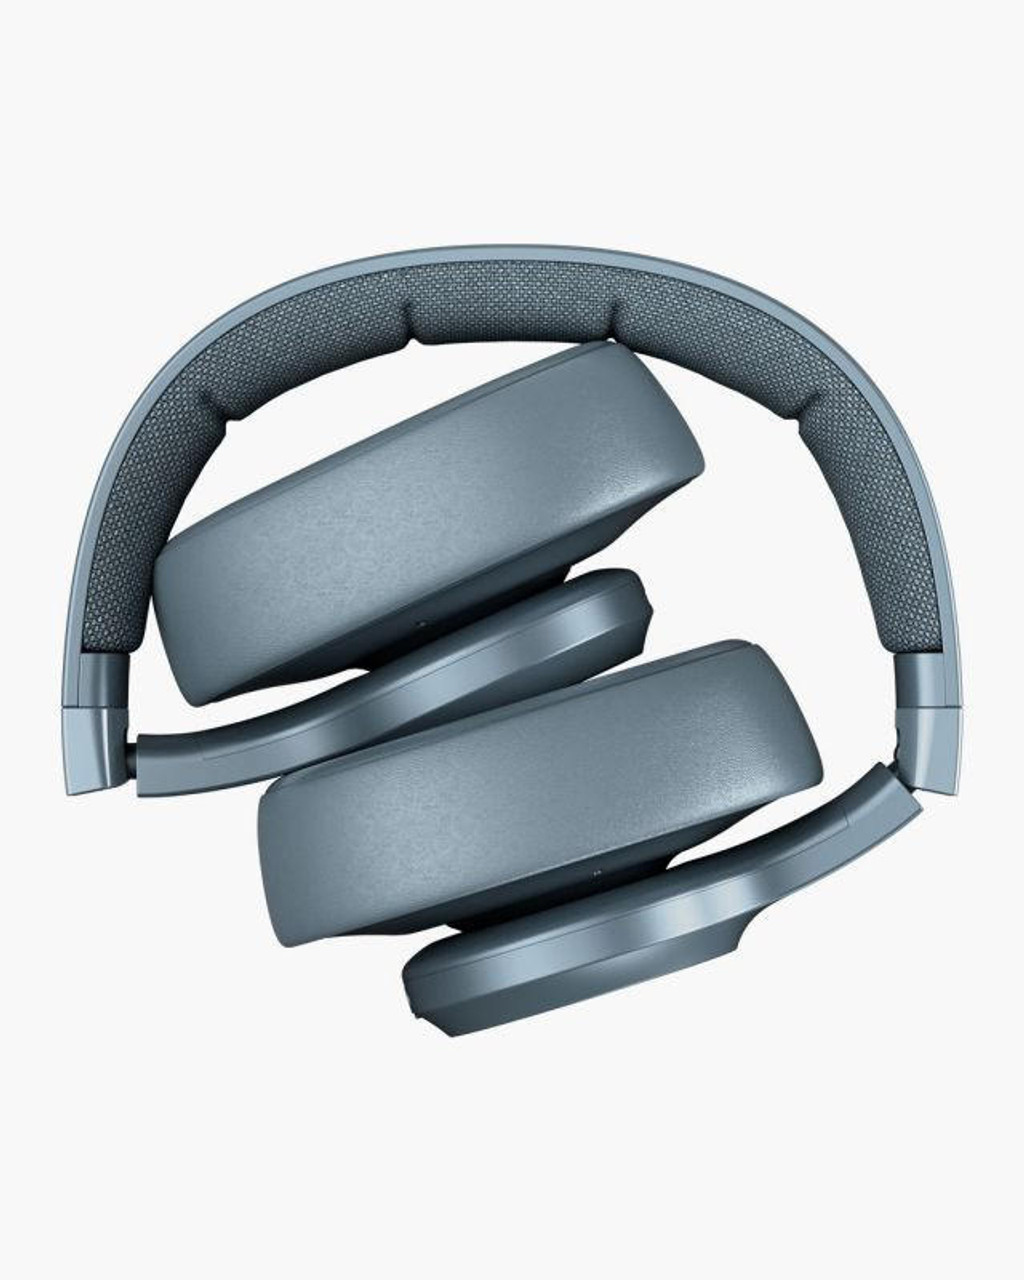 Clam 2 ANC | Wireless over-ear headphones with active noise cancelling | Dive  Blue | 3HP4102DV